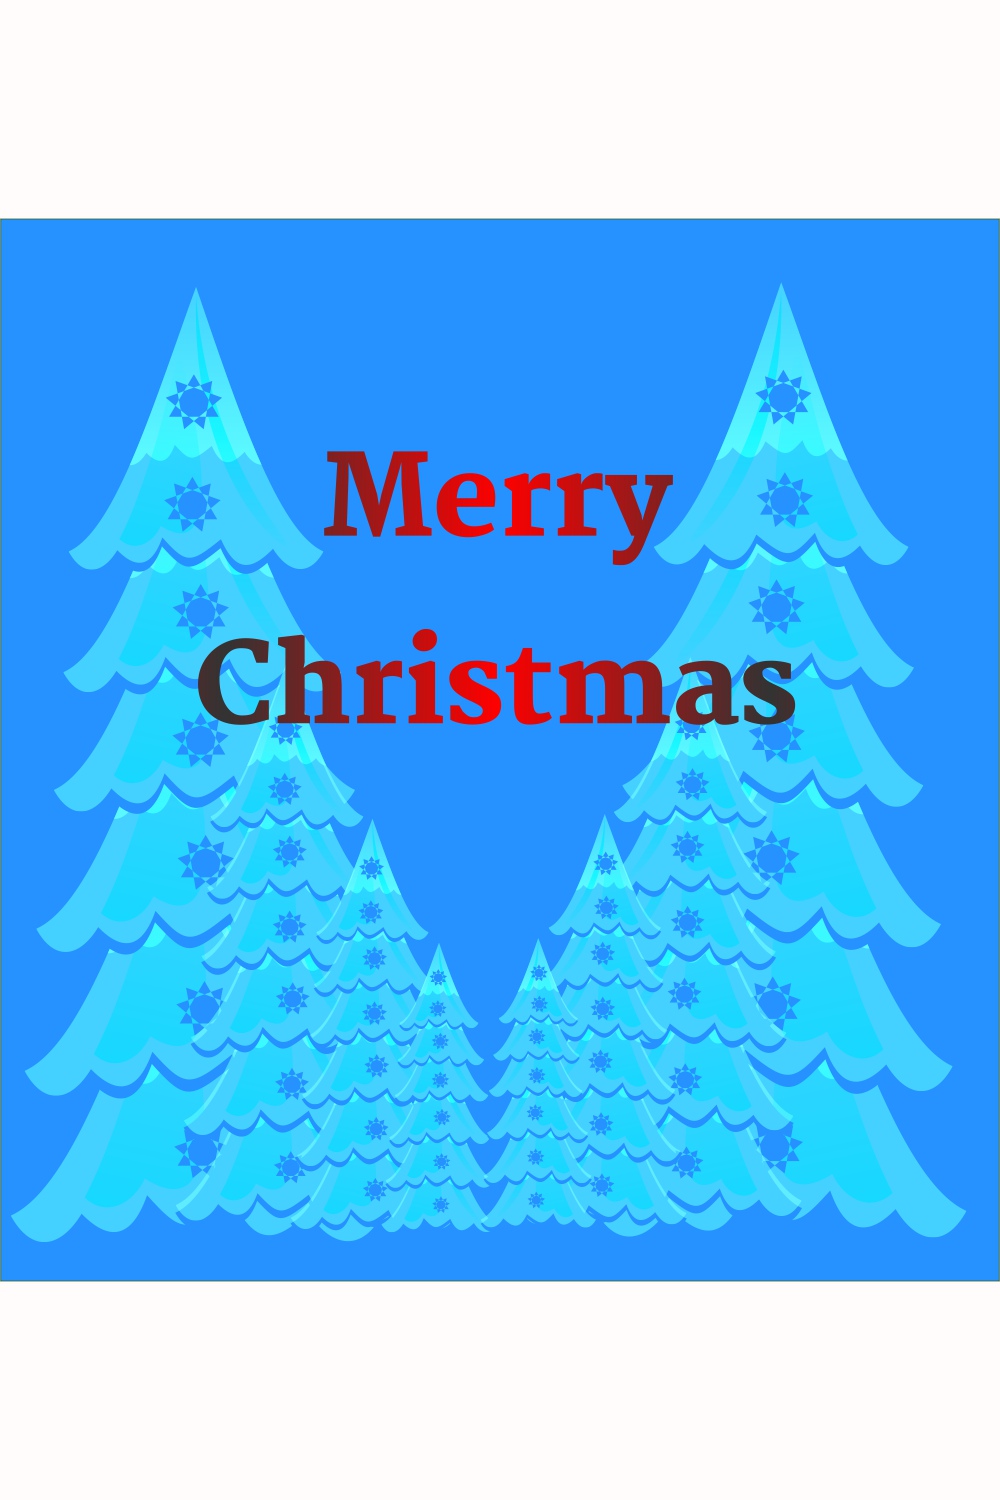 merry christmas pinterest preview image.